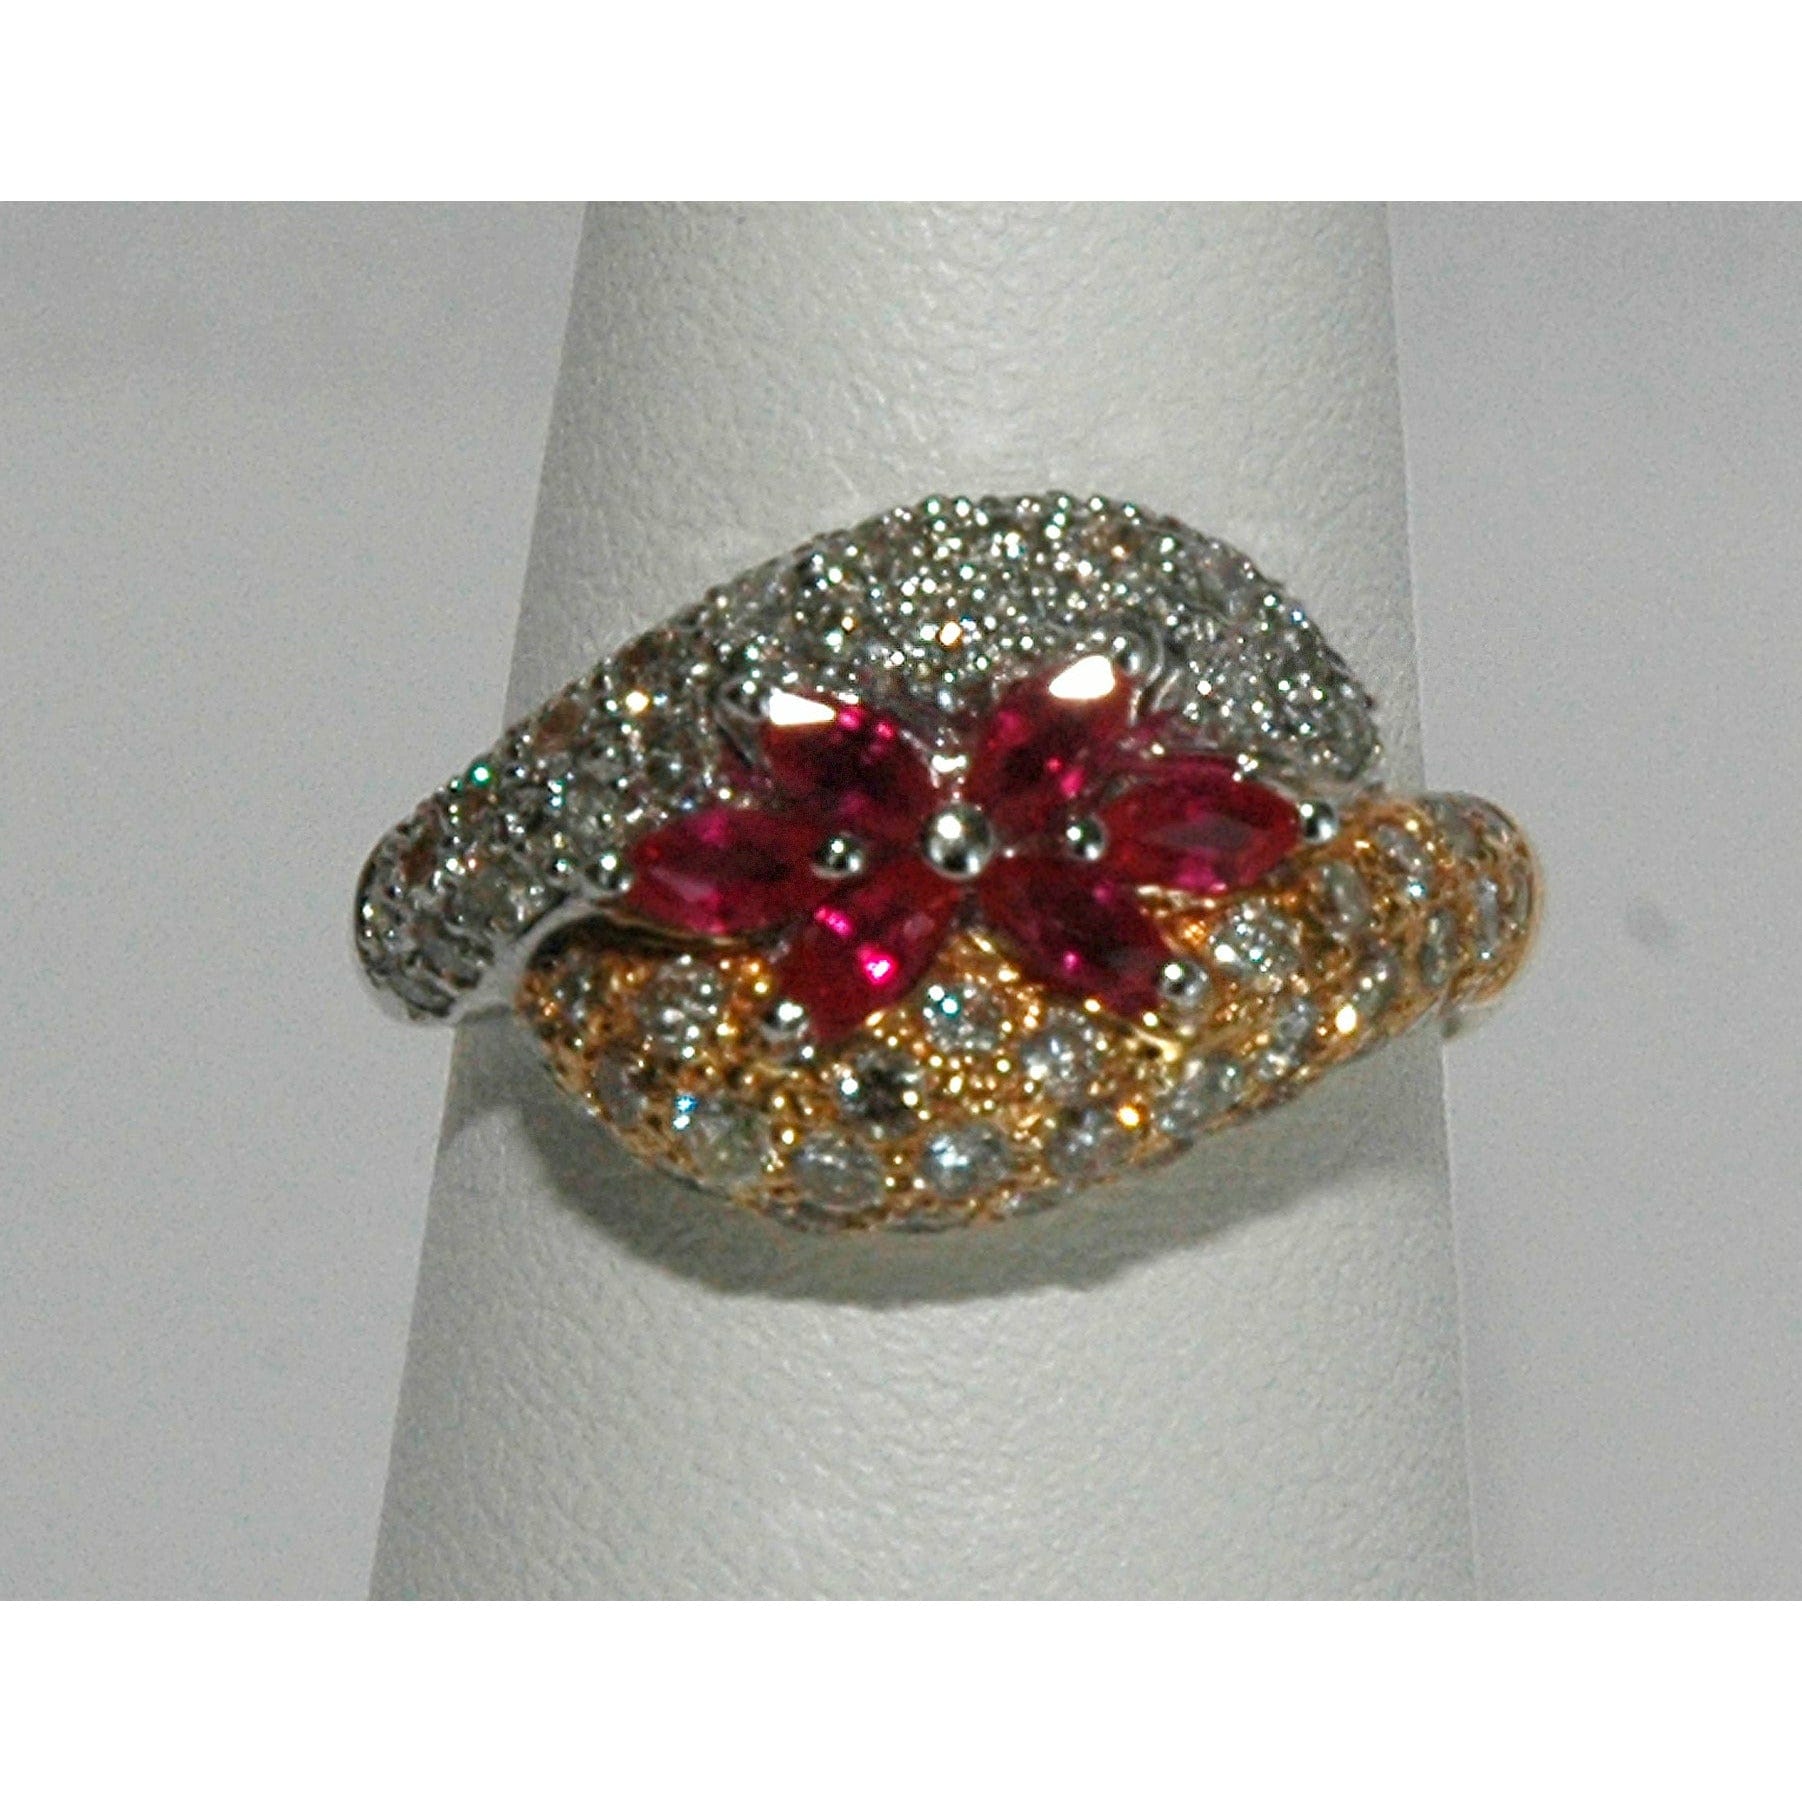 FJL Jewelry Gemstone Ring Impressive Two-Tone Ruby Marquise Ring w/ Diamonds in 18K Gold, Red Ruby Gemstones & Diamond Ring